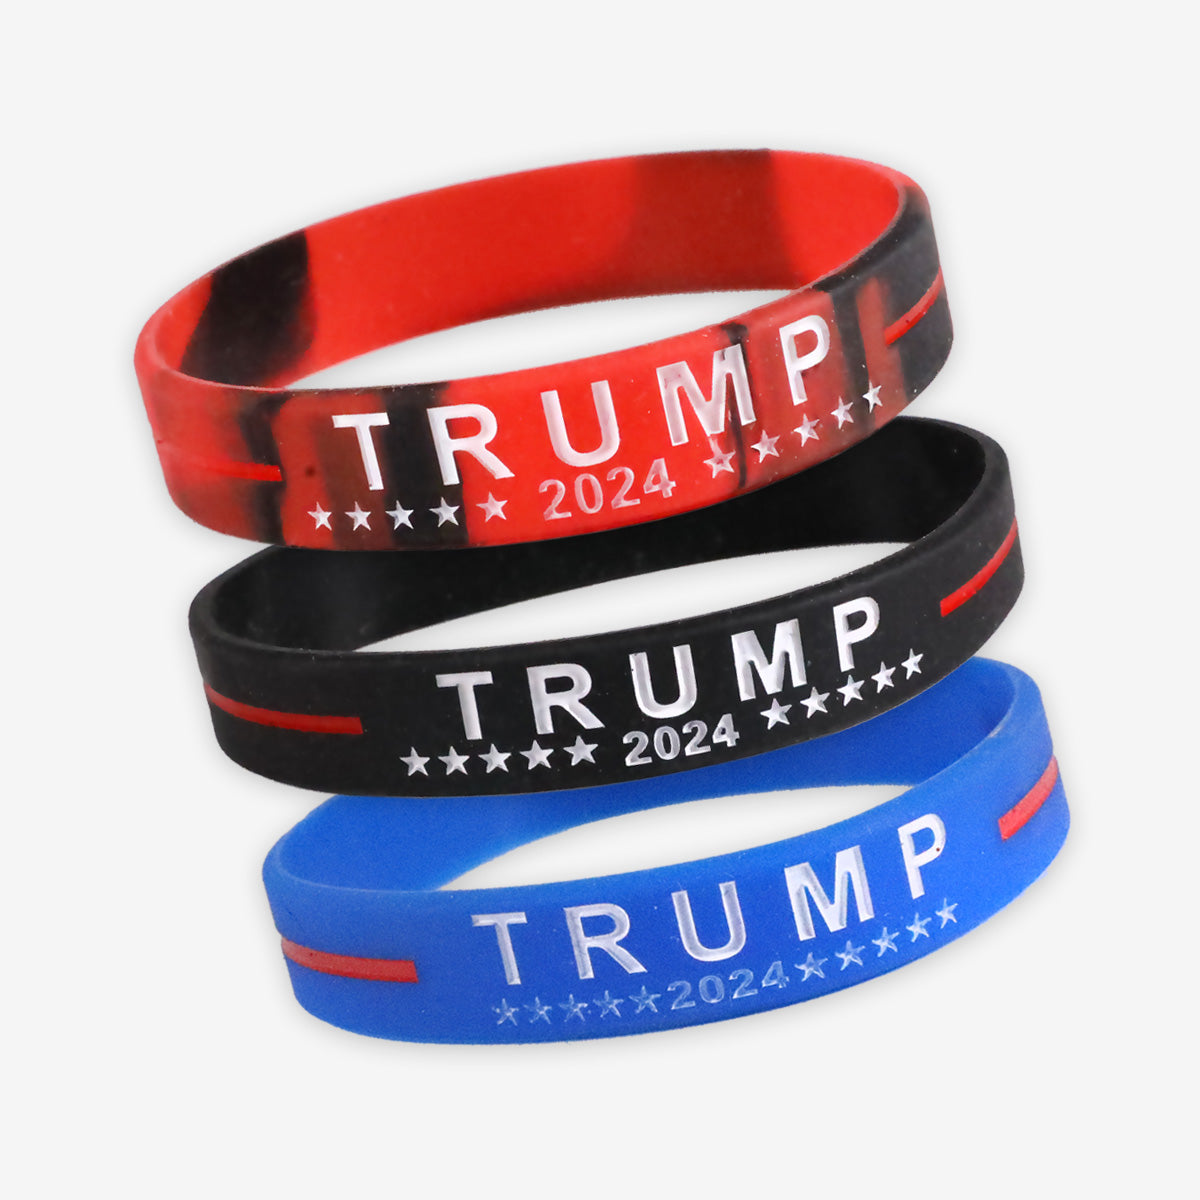 (3 Pack) Trump 2024 Silicone Wristband Bracelet - Red, Black, Blue